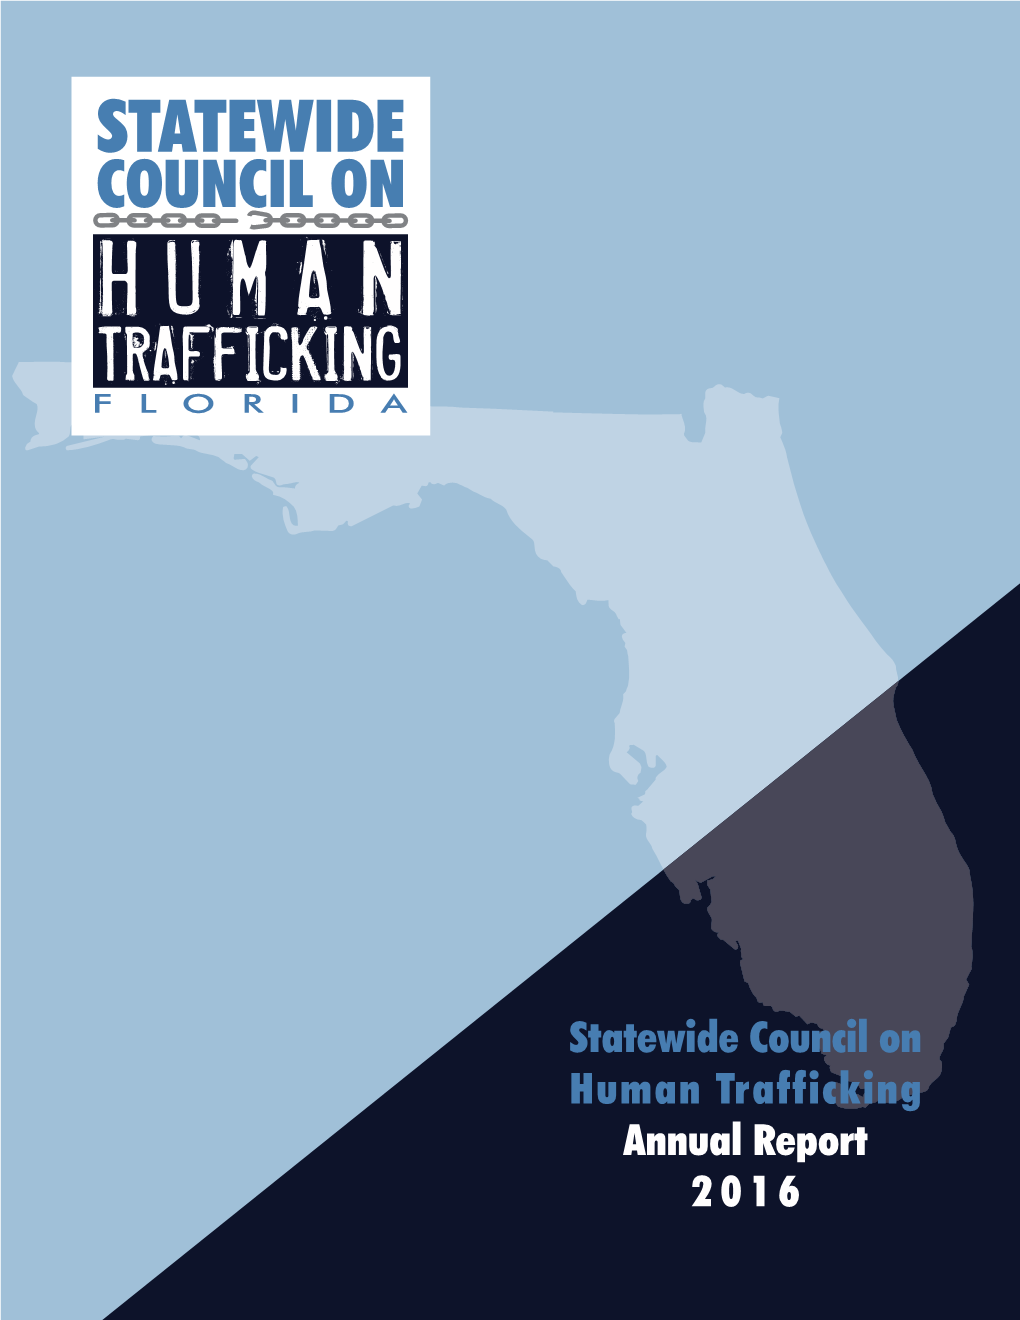 2016 Statewide Council on Human Trafficking Annual Report